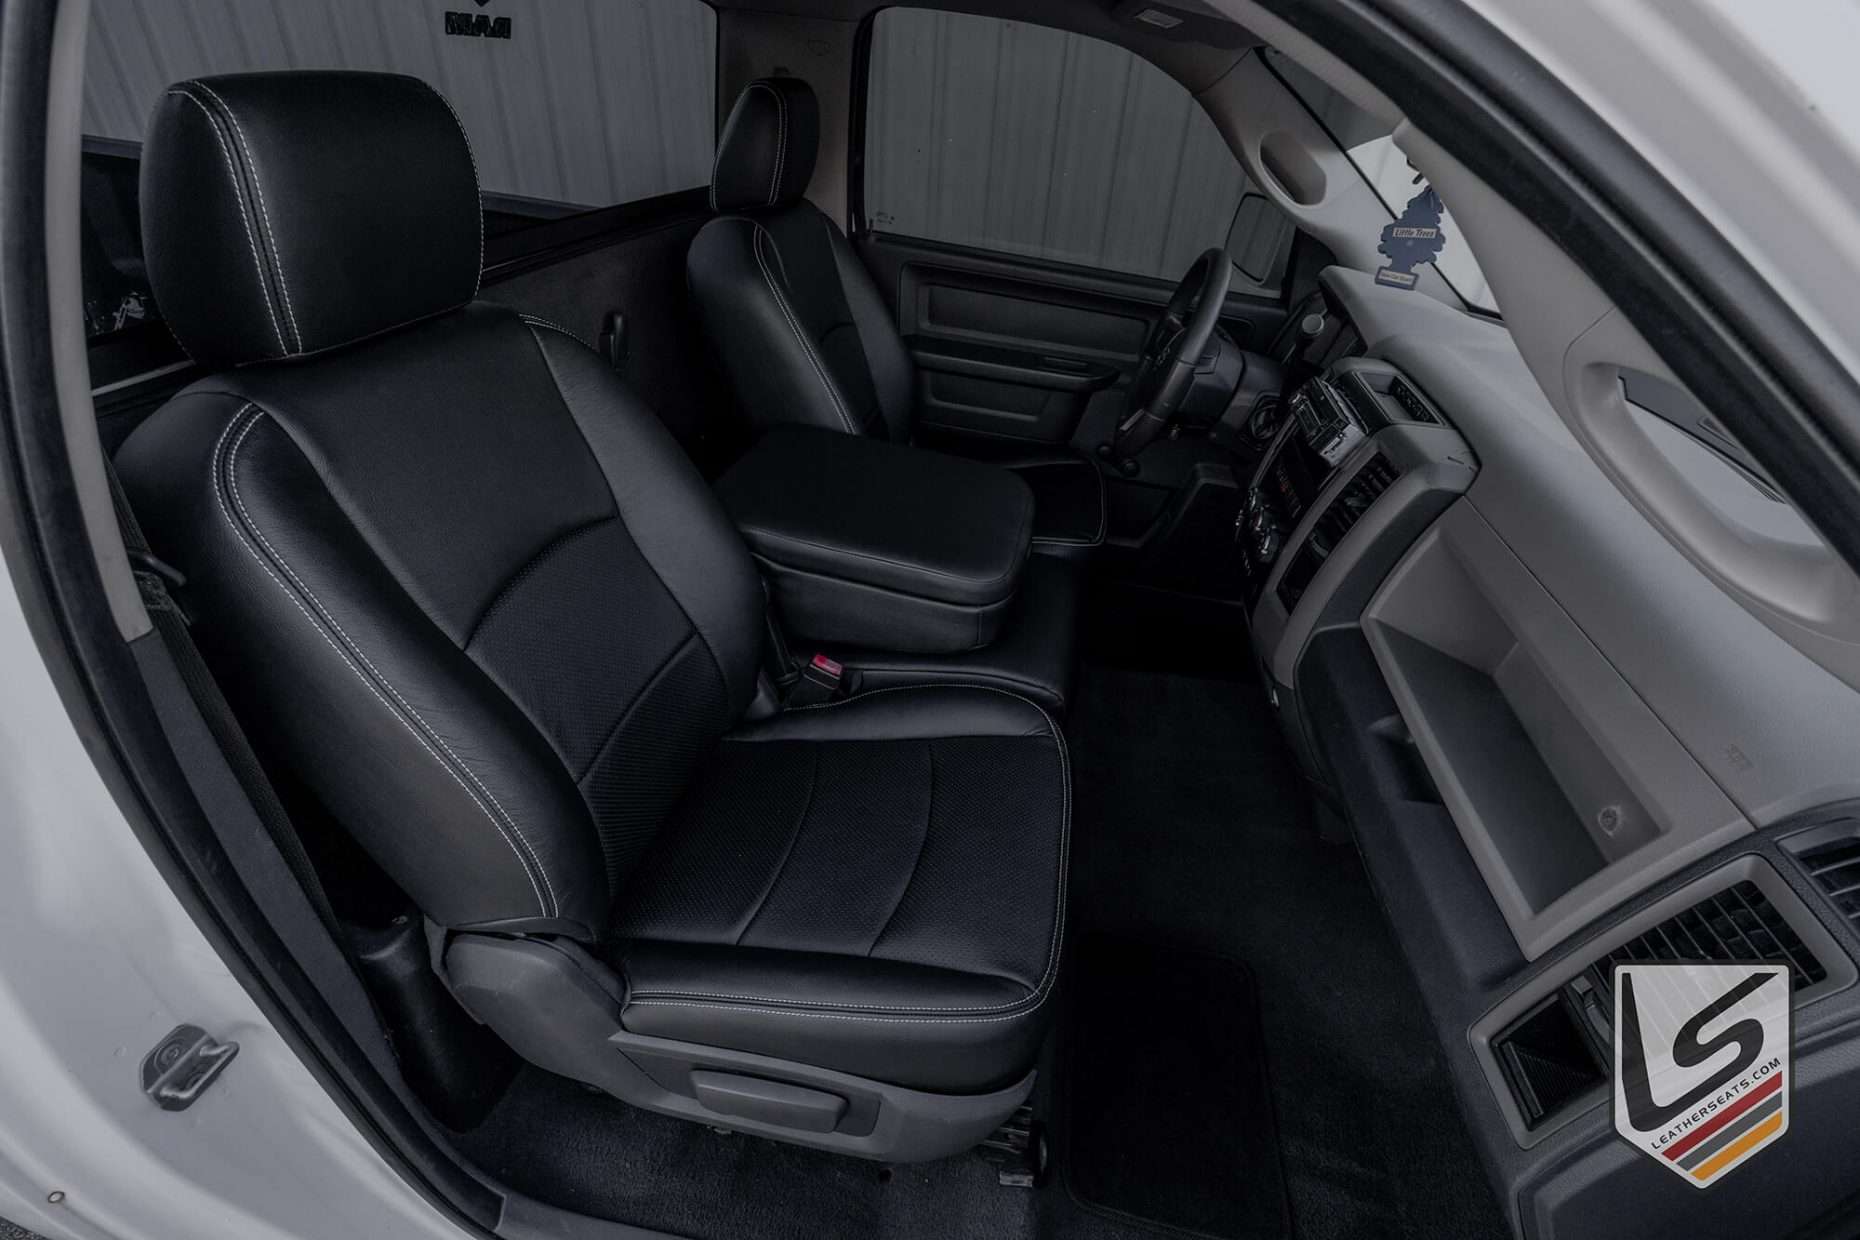 2009-2012 Dodge Ram Regular Cab with Black leather interior from leatherseats.com